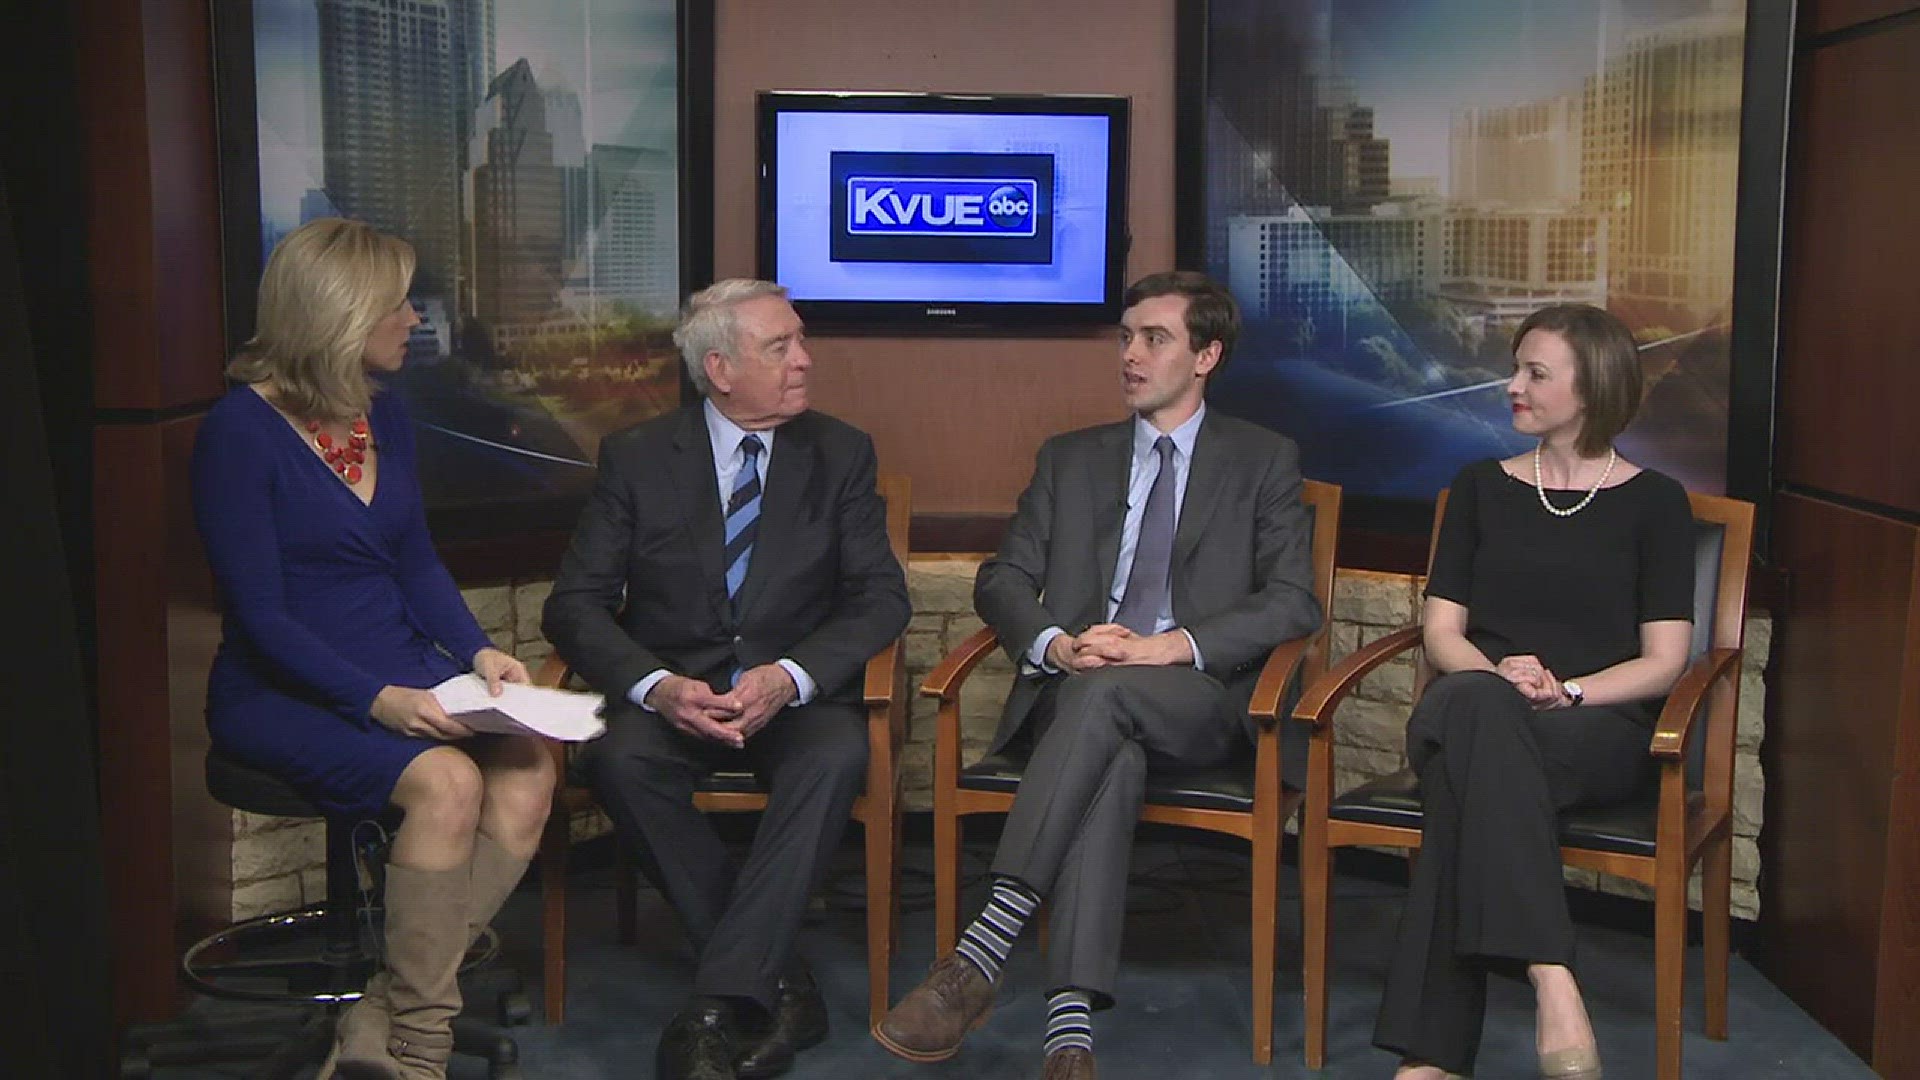 Rather Prize: Dan Rather talks to KVUE about program